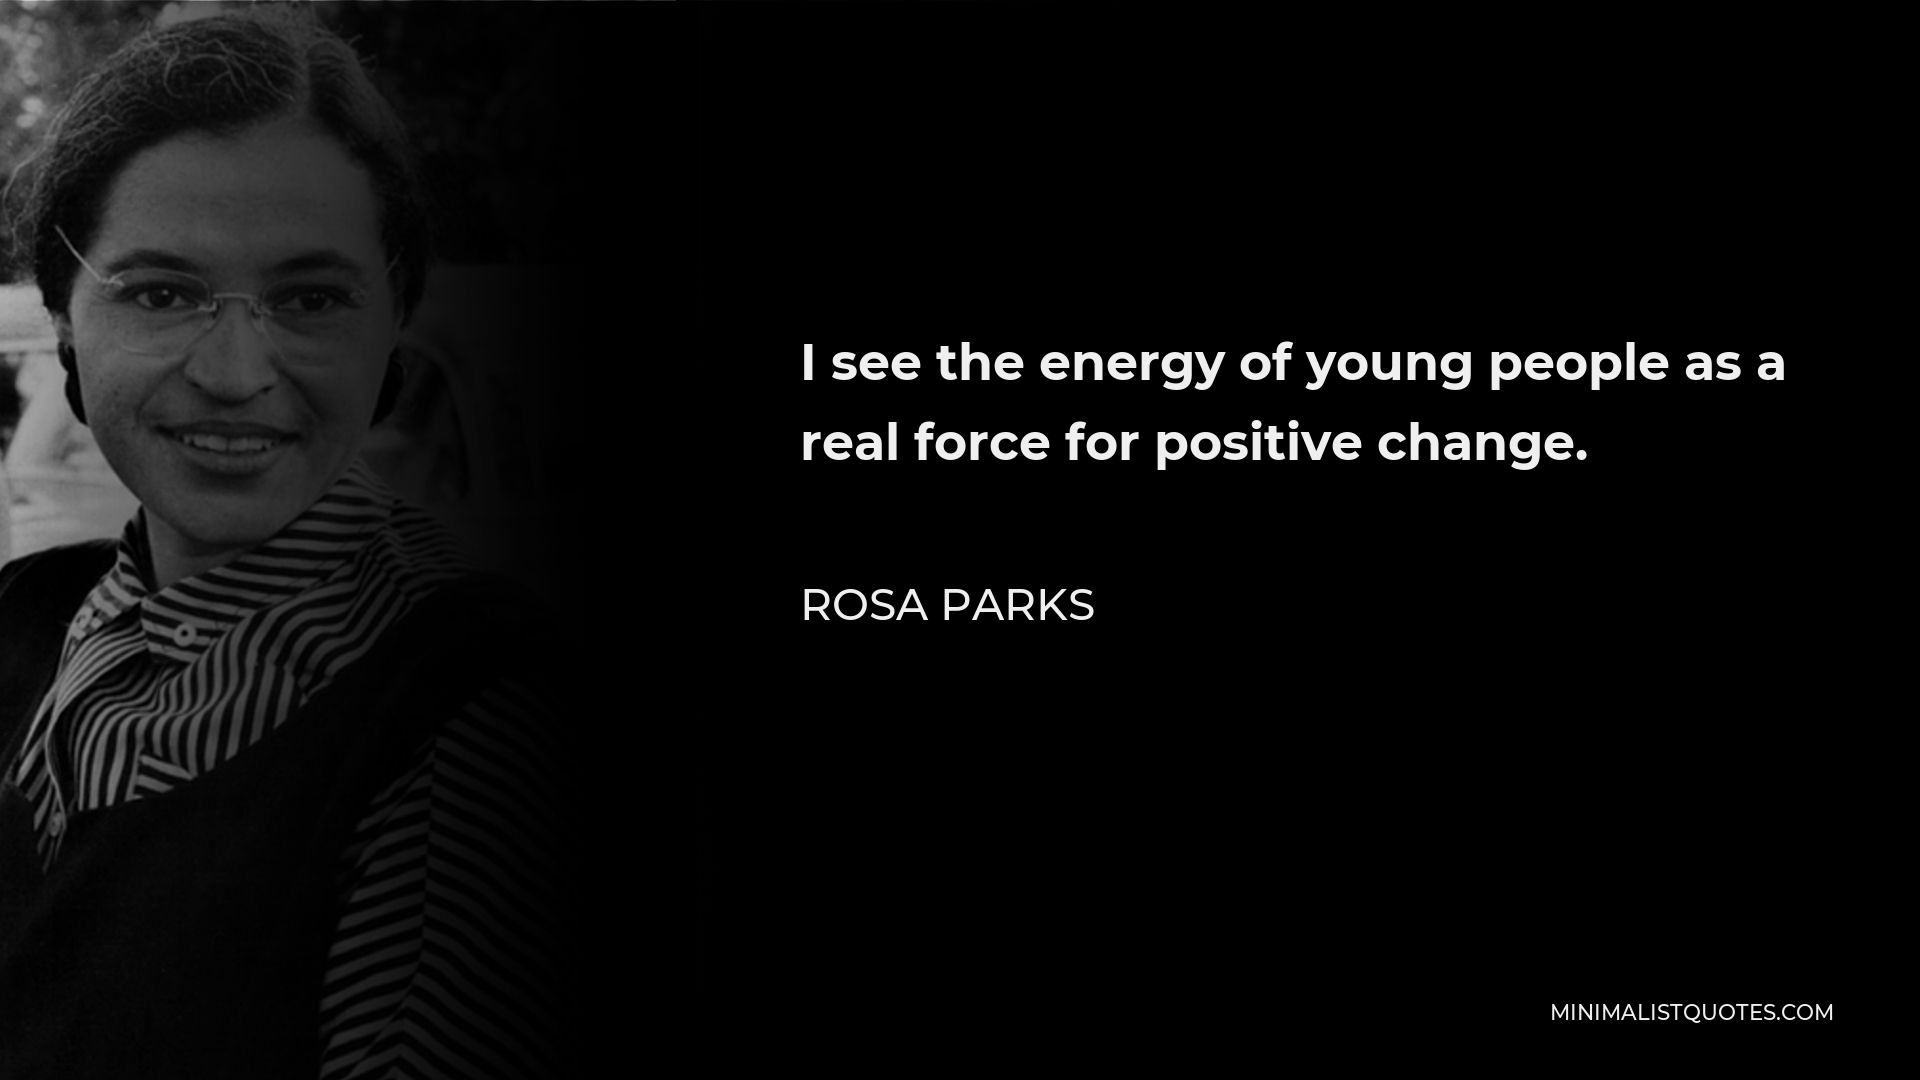 Rosa Parks Quote - I see the energy of young people as a real force for positive change.